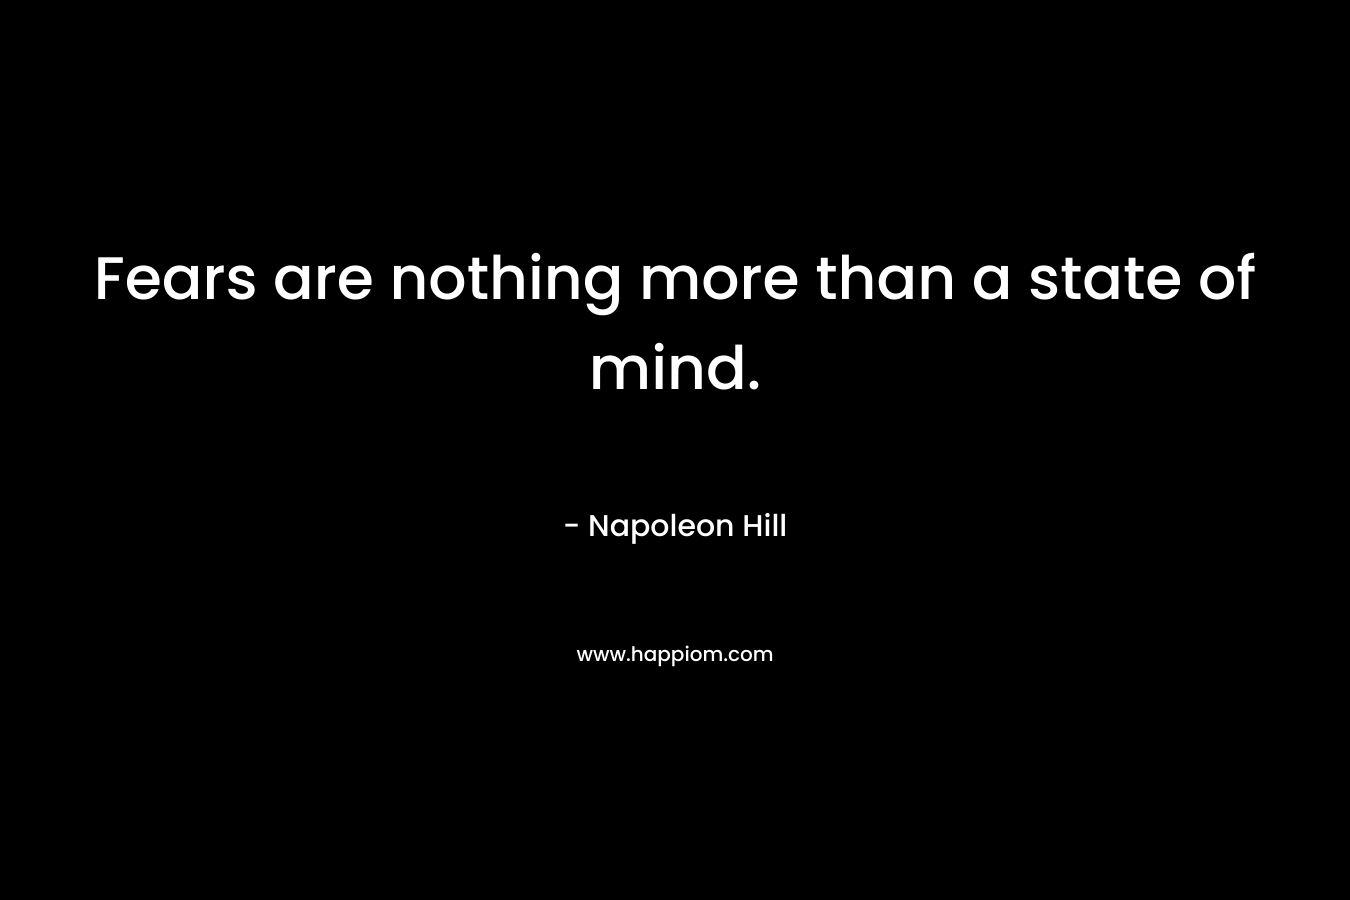 Fears are nothing more than a state of mind. – Napoleon Hill